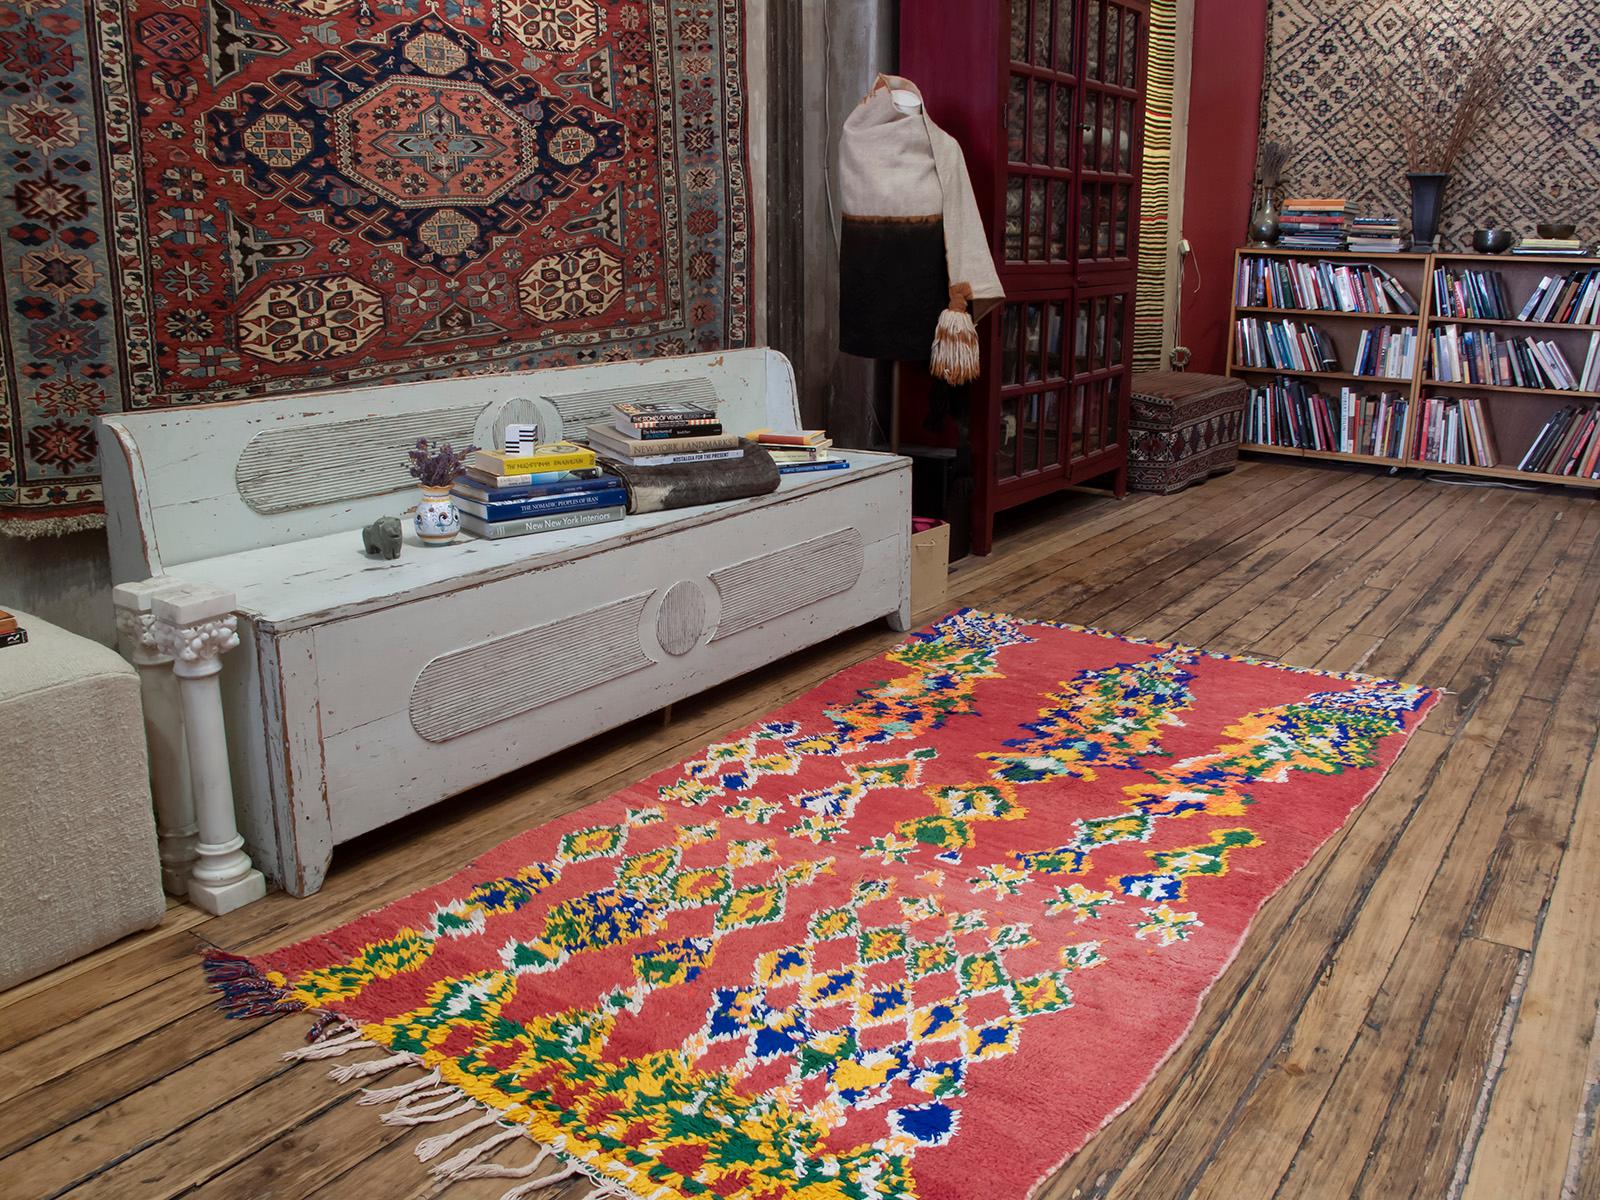 Did the weaver keep changing her mind or did she know what she wanted all along? A bright and cheerful rug from the vicinity of Boujad in the Beni Mellal-Khenifra region in central Morocco - an authentic, home-made weaving brimming with creative